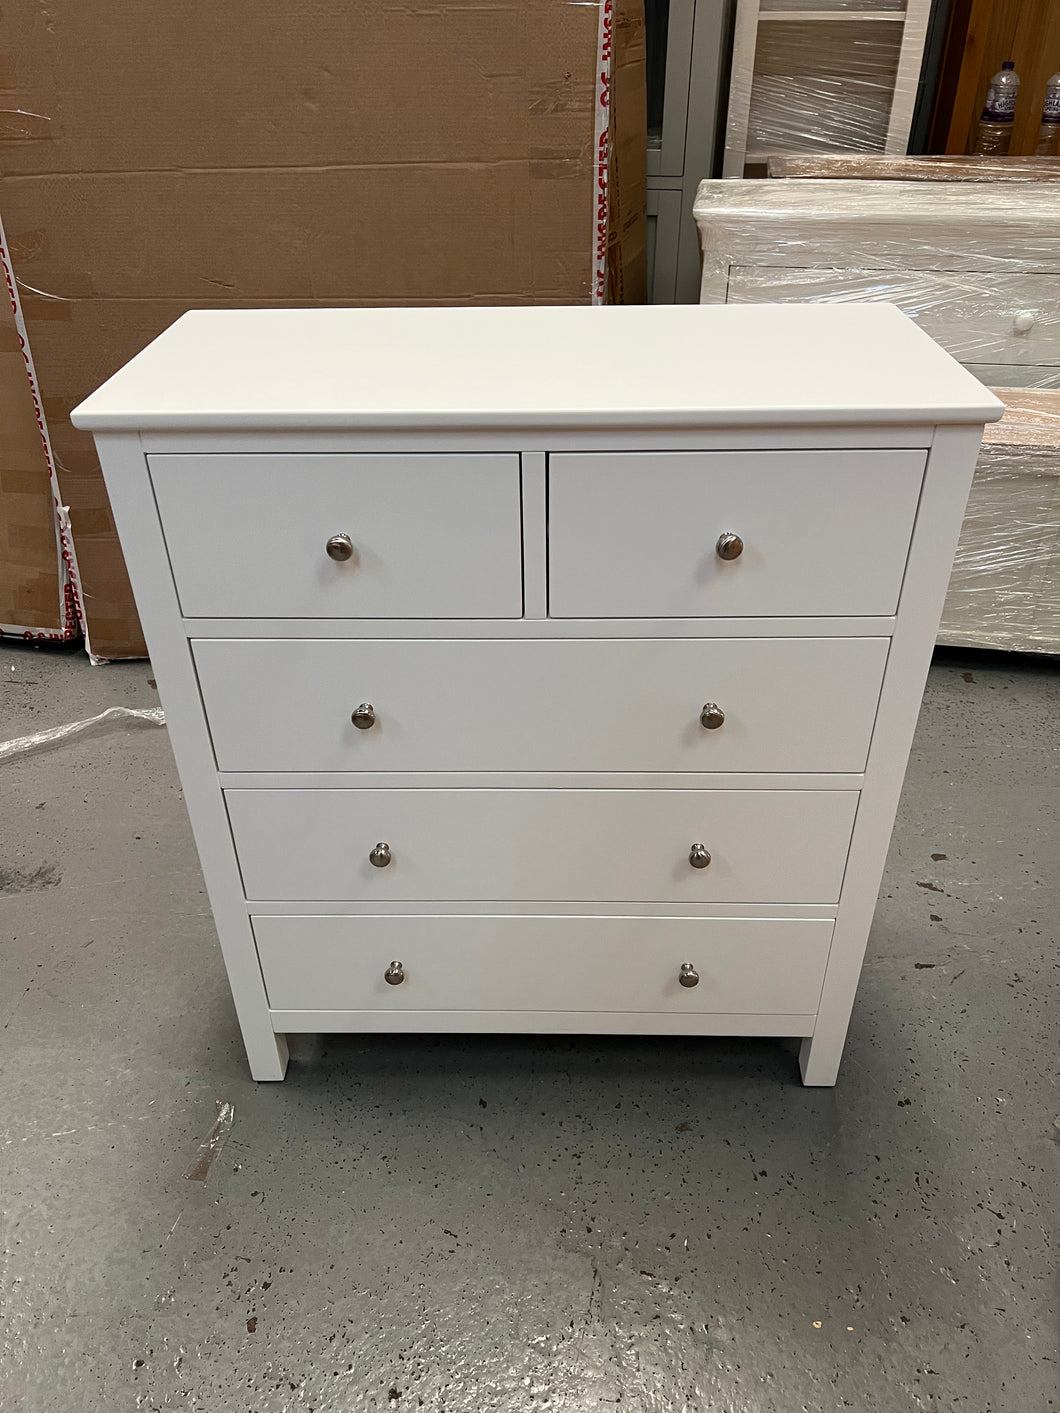 SIMPLY COTSWOLD PURE WHITE
5 Drawer Chest Quality Furniture Clearance Ltd